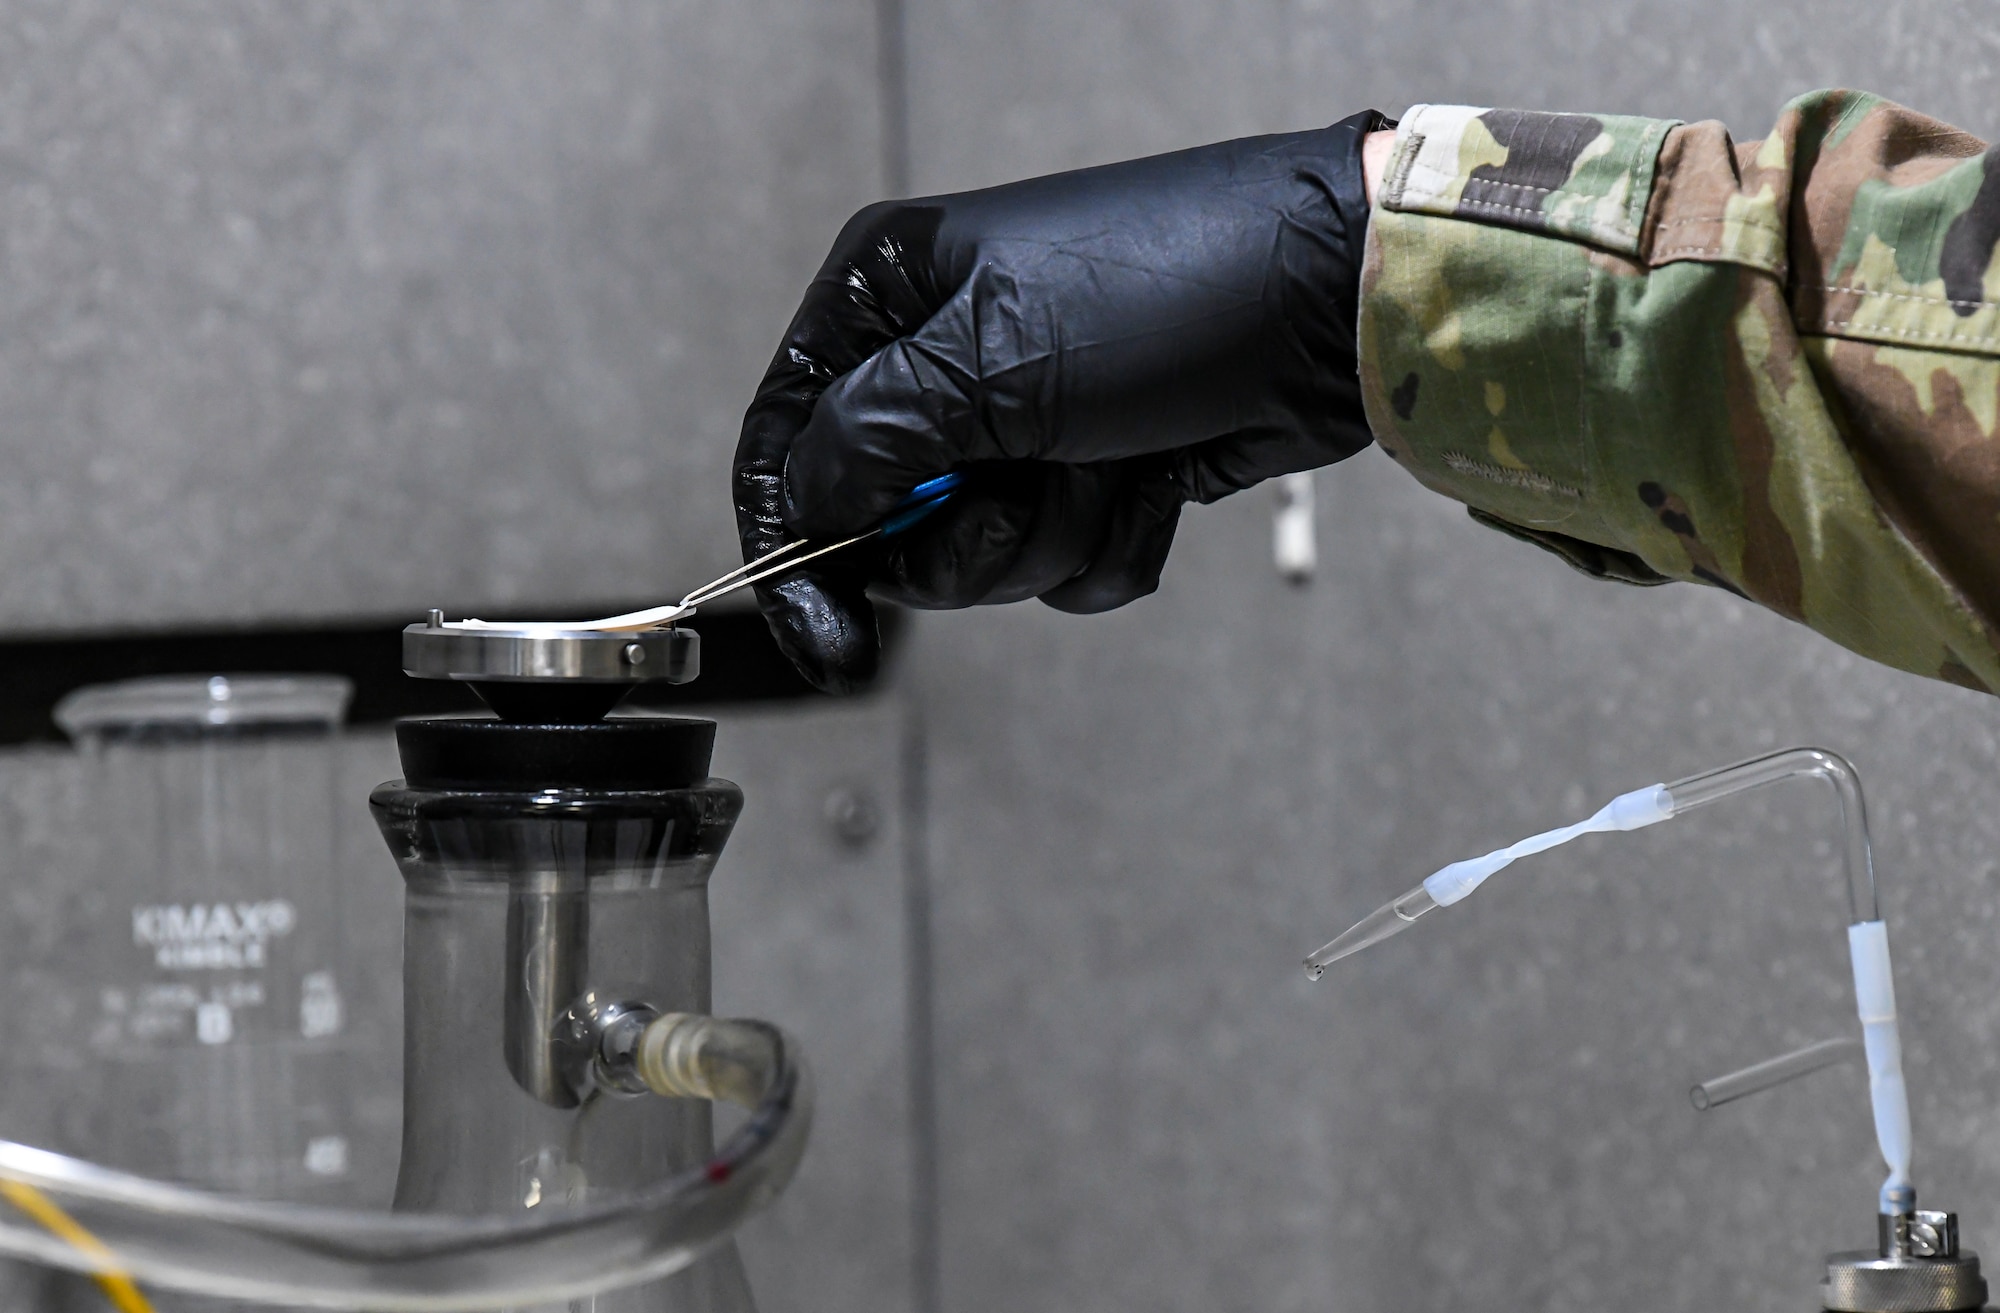 Staff Sgt. Brian Elrod, 436th Logistics Readiness Squadron fuels laboratory noncommissioned officer in charge, removes a micron filter during the bottle method testing process at Dover Air Force Base, Delaware, Jan. 12, 2021. The micron filter is weighed before the bottle test, and a gallon of fuel is then poured through the filter to collect particulates. The filter is then dried and weighed again. The weight difference determines how much particulate is in a given sample of fuel. (U.S. Air Force photo by Airman 1st Class Stephani Barge)